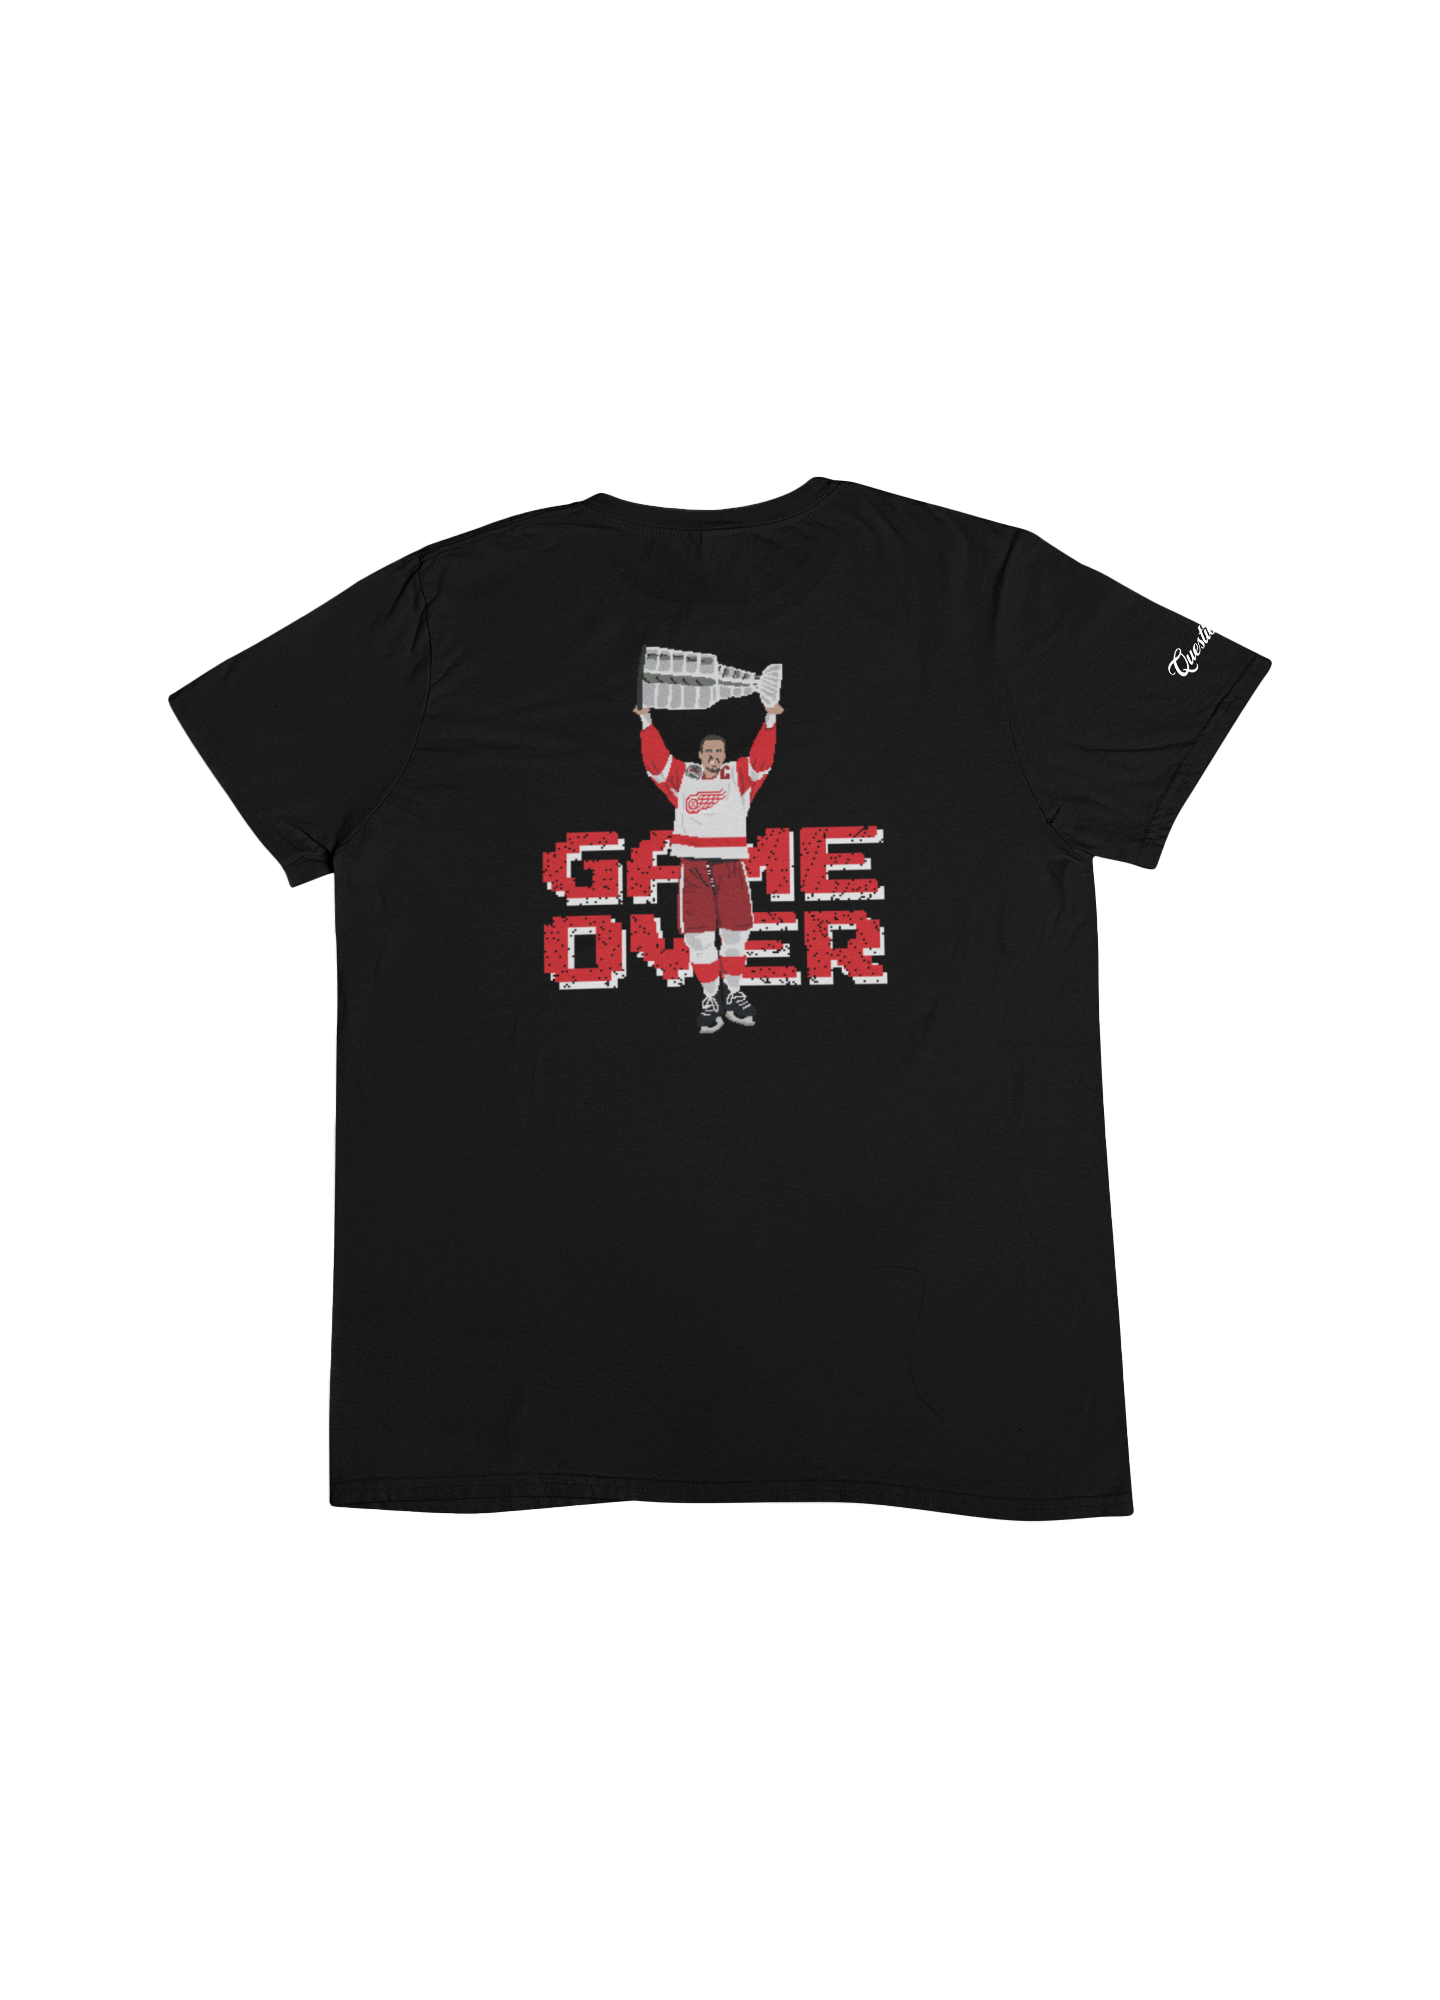 Stevie "The Captain" Game Over T-Shirt